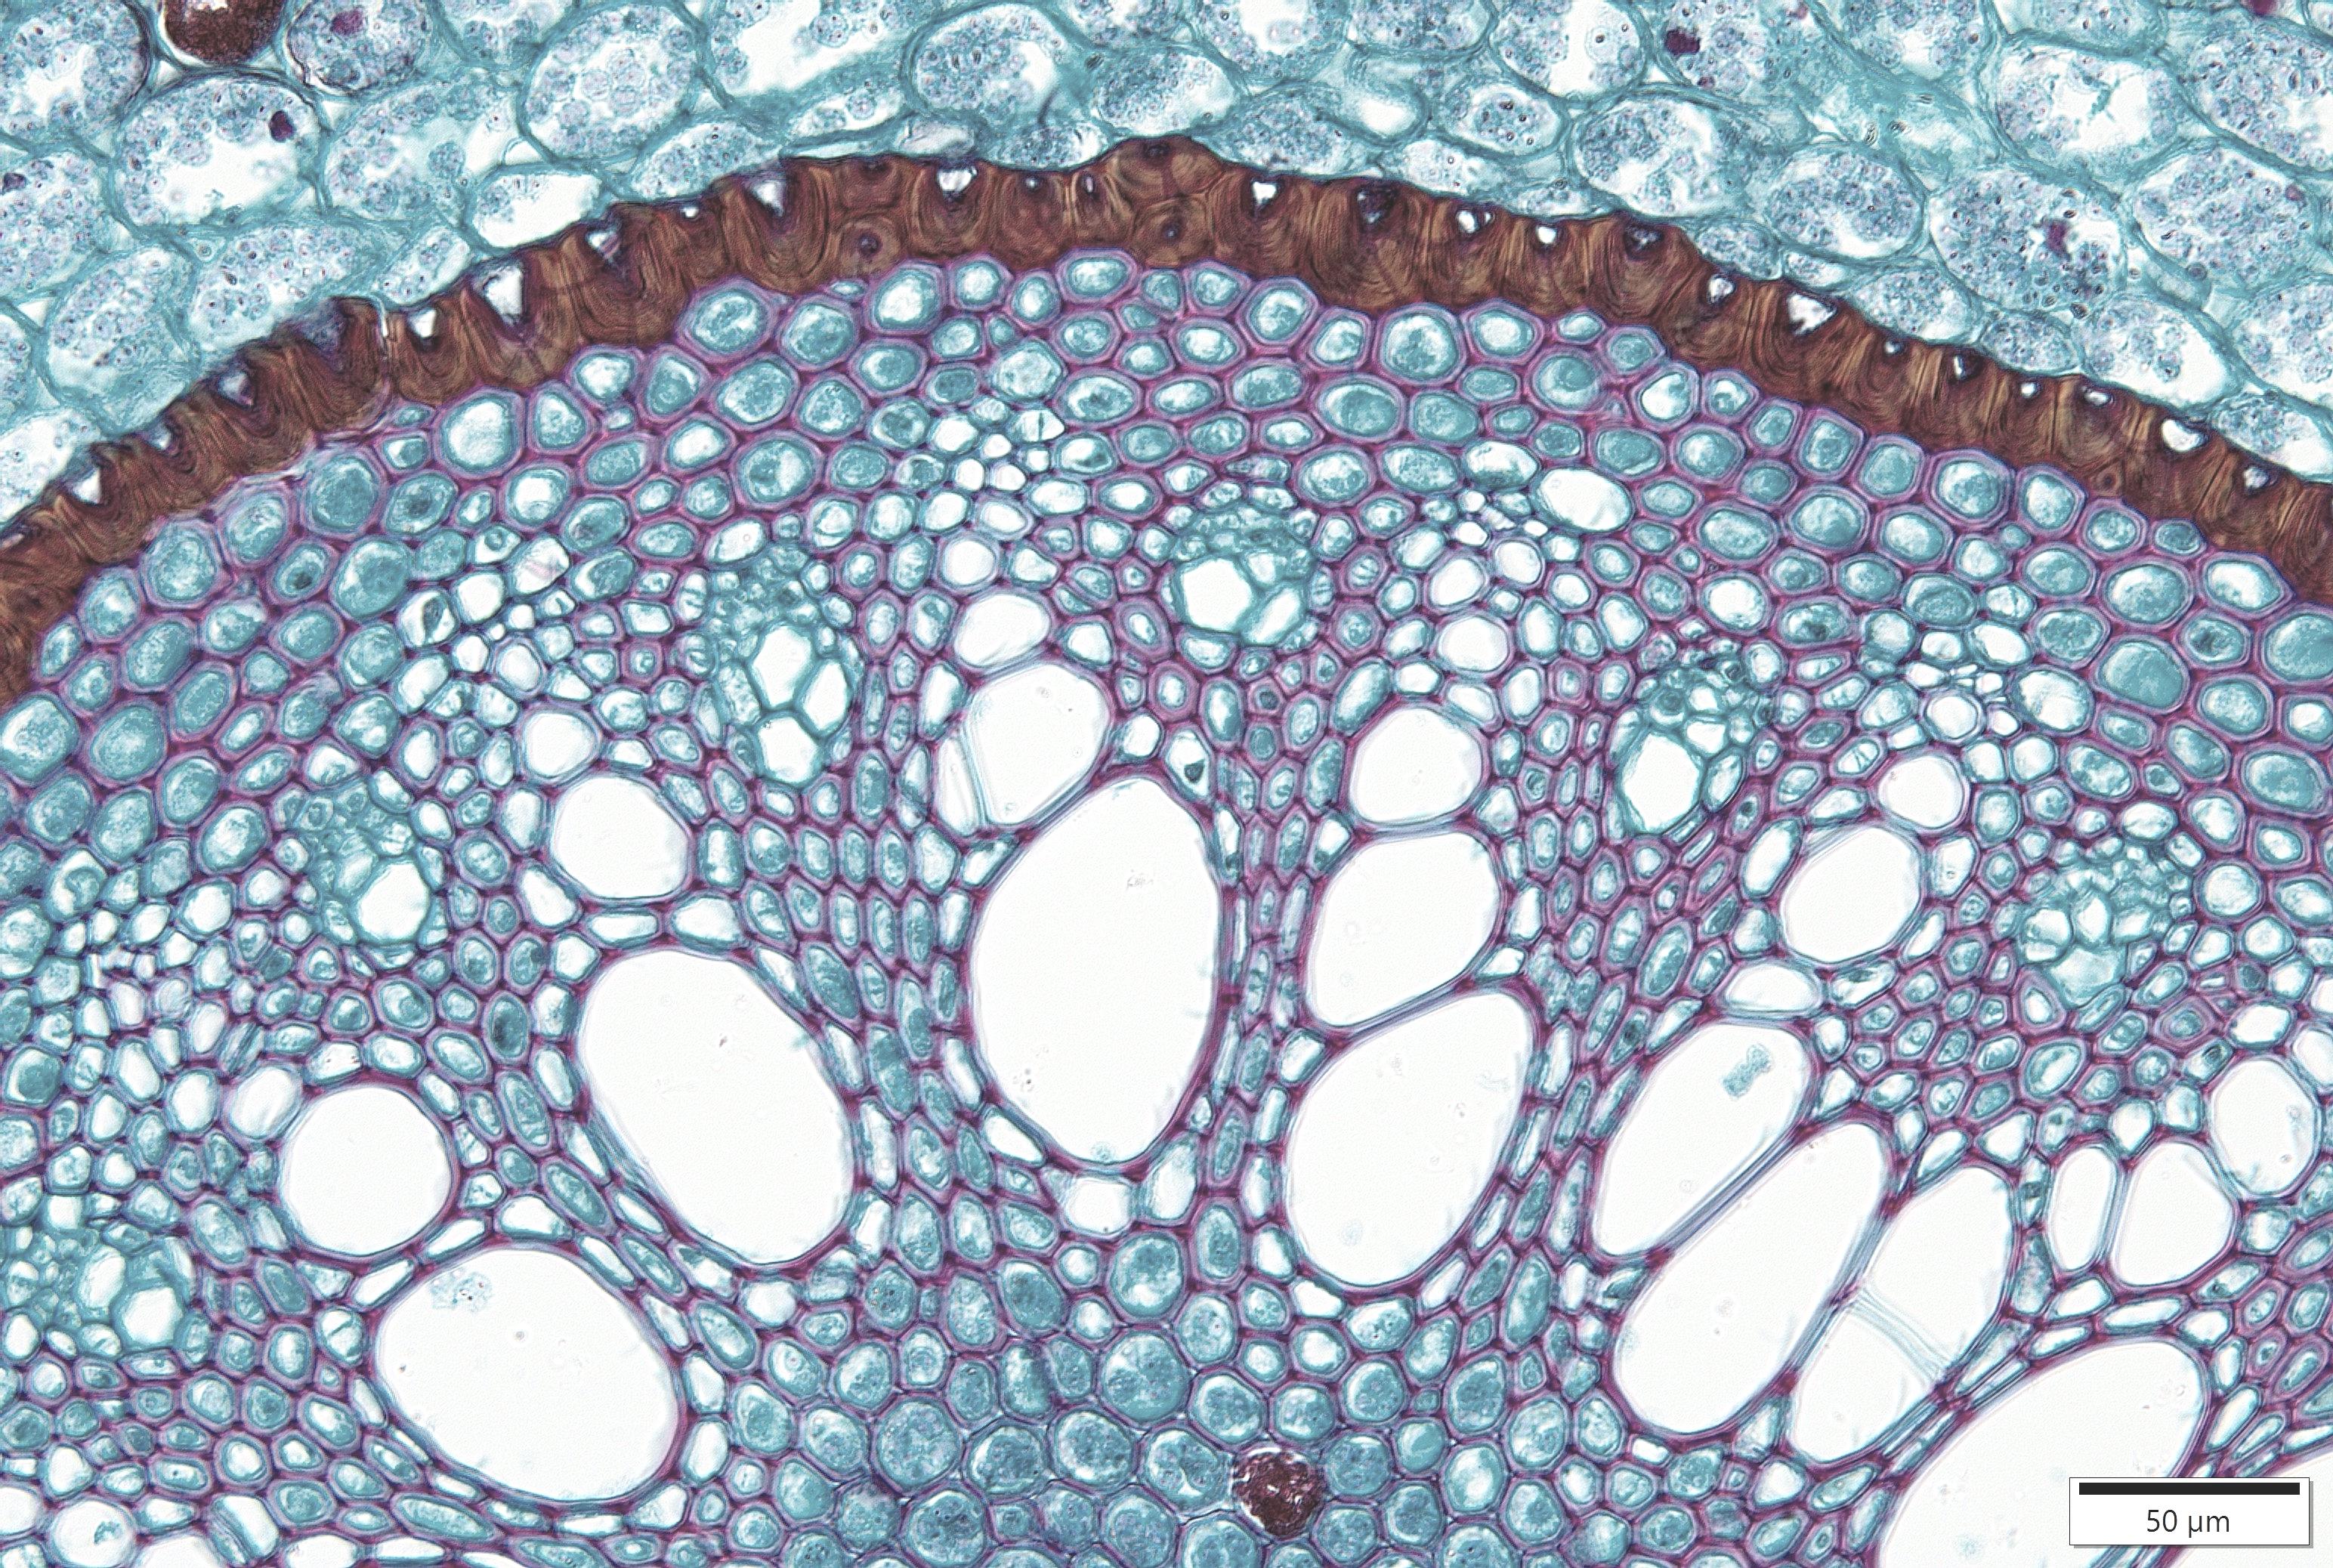 Another view of a Smilax root steleshowing the xylem and phloem tissues